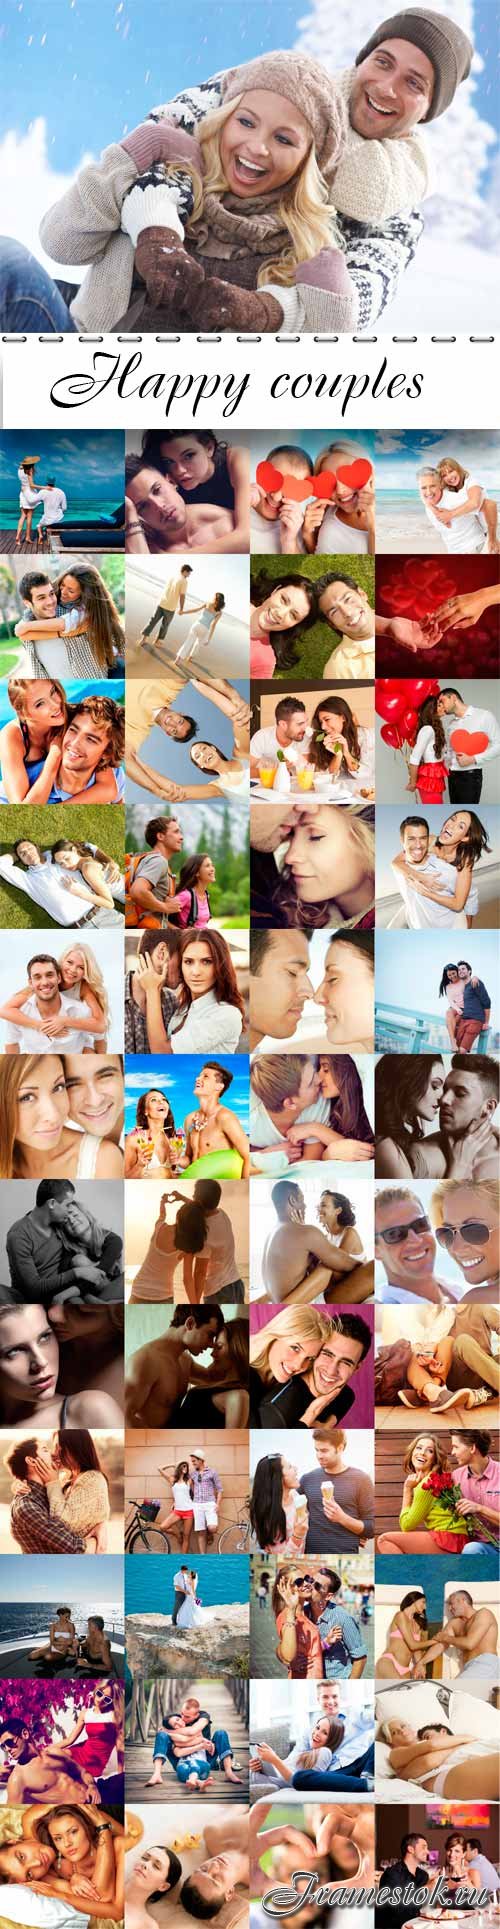 Happy couples raster graphics collection